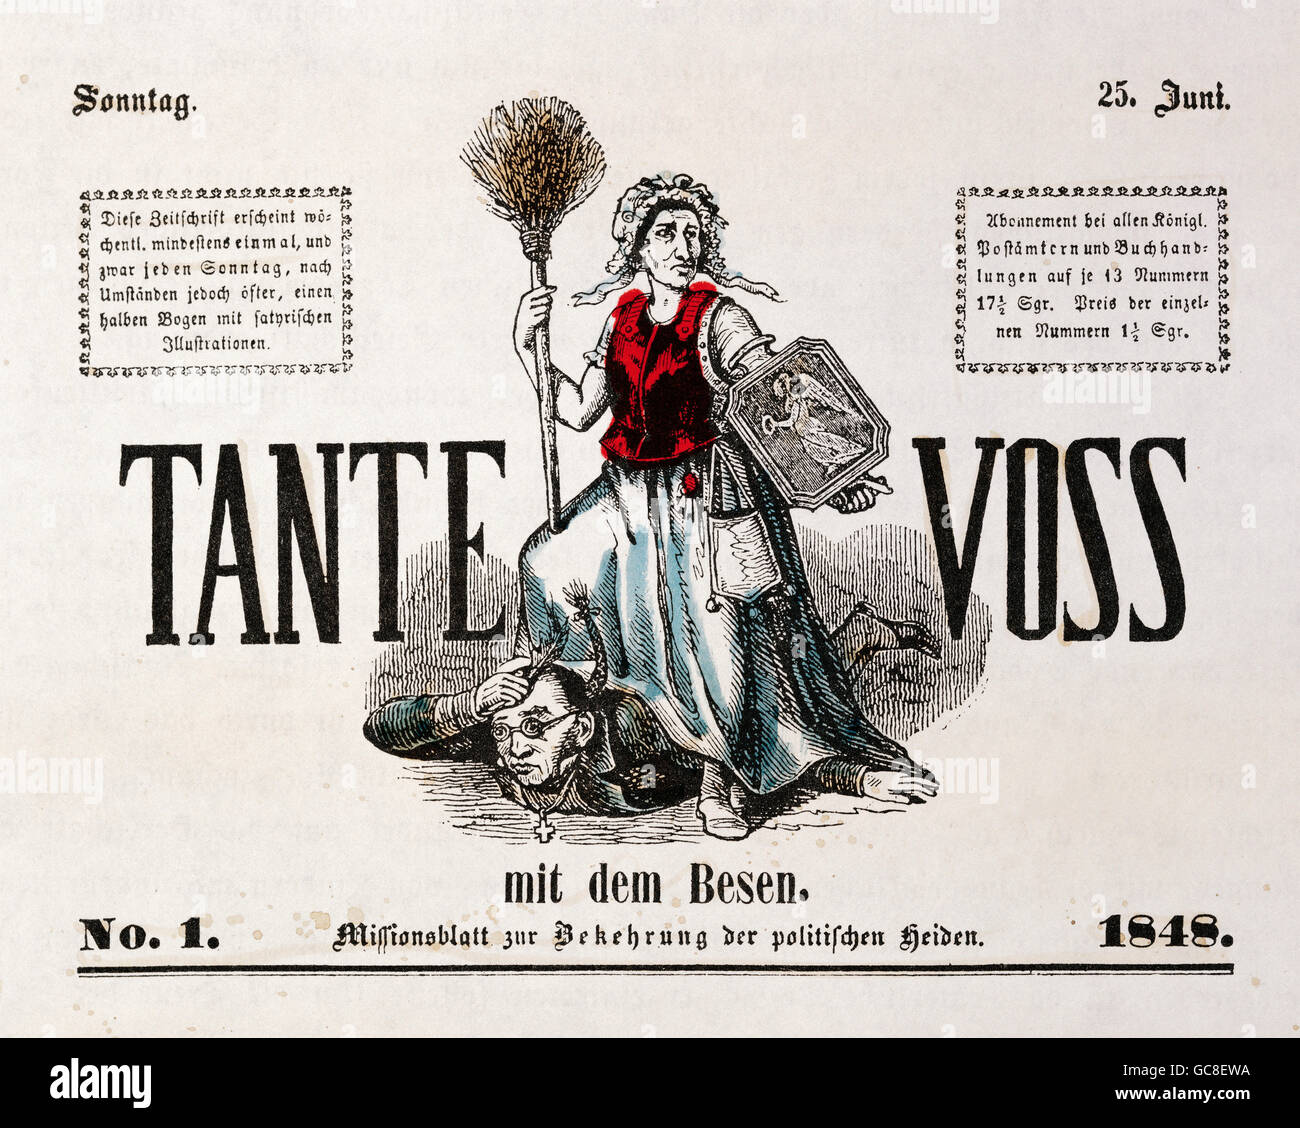 Events, Revolution 1848, caricature politiche 'Tante Voss mit dem Besen', copertina di Vossische Zeitung, Germania, 1848, Additional-Rights-Clearences-Not Available Foto Stock